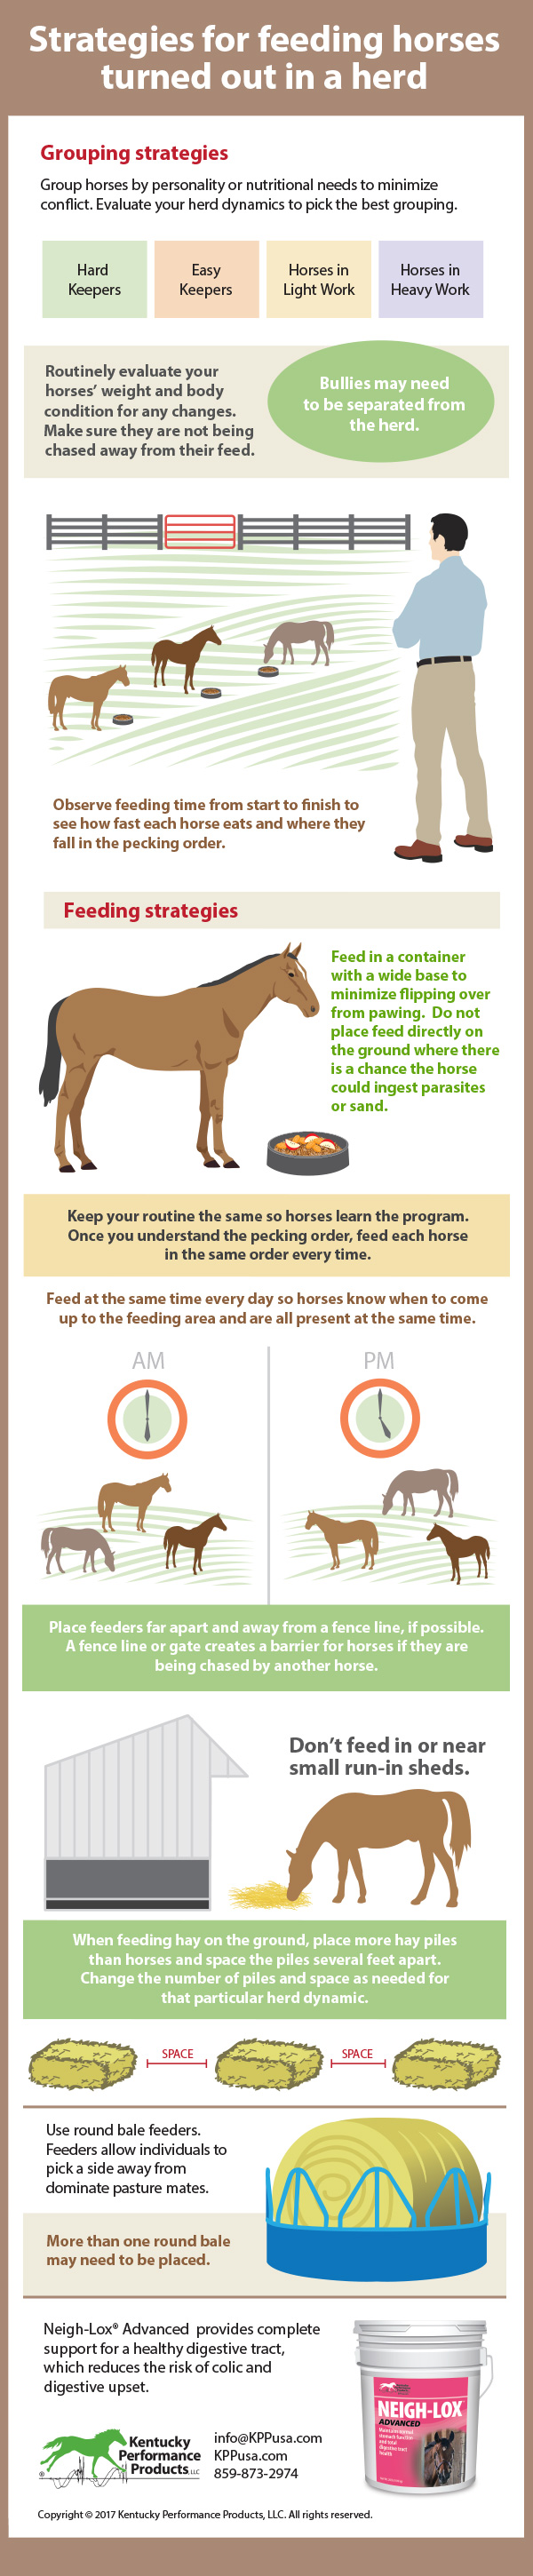 Strategies-for-feeding-horses-turned-out-in-a-herd-17-154